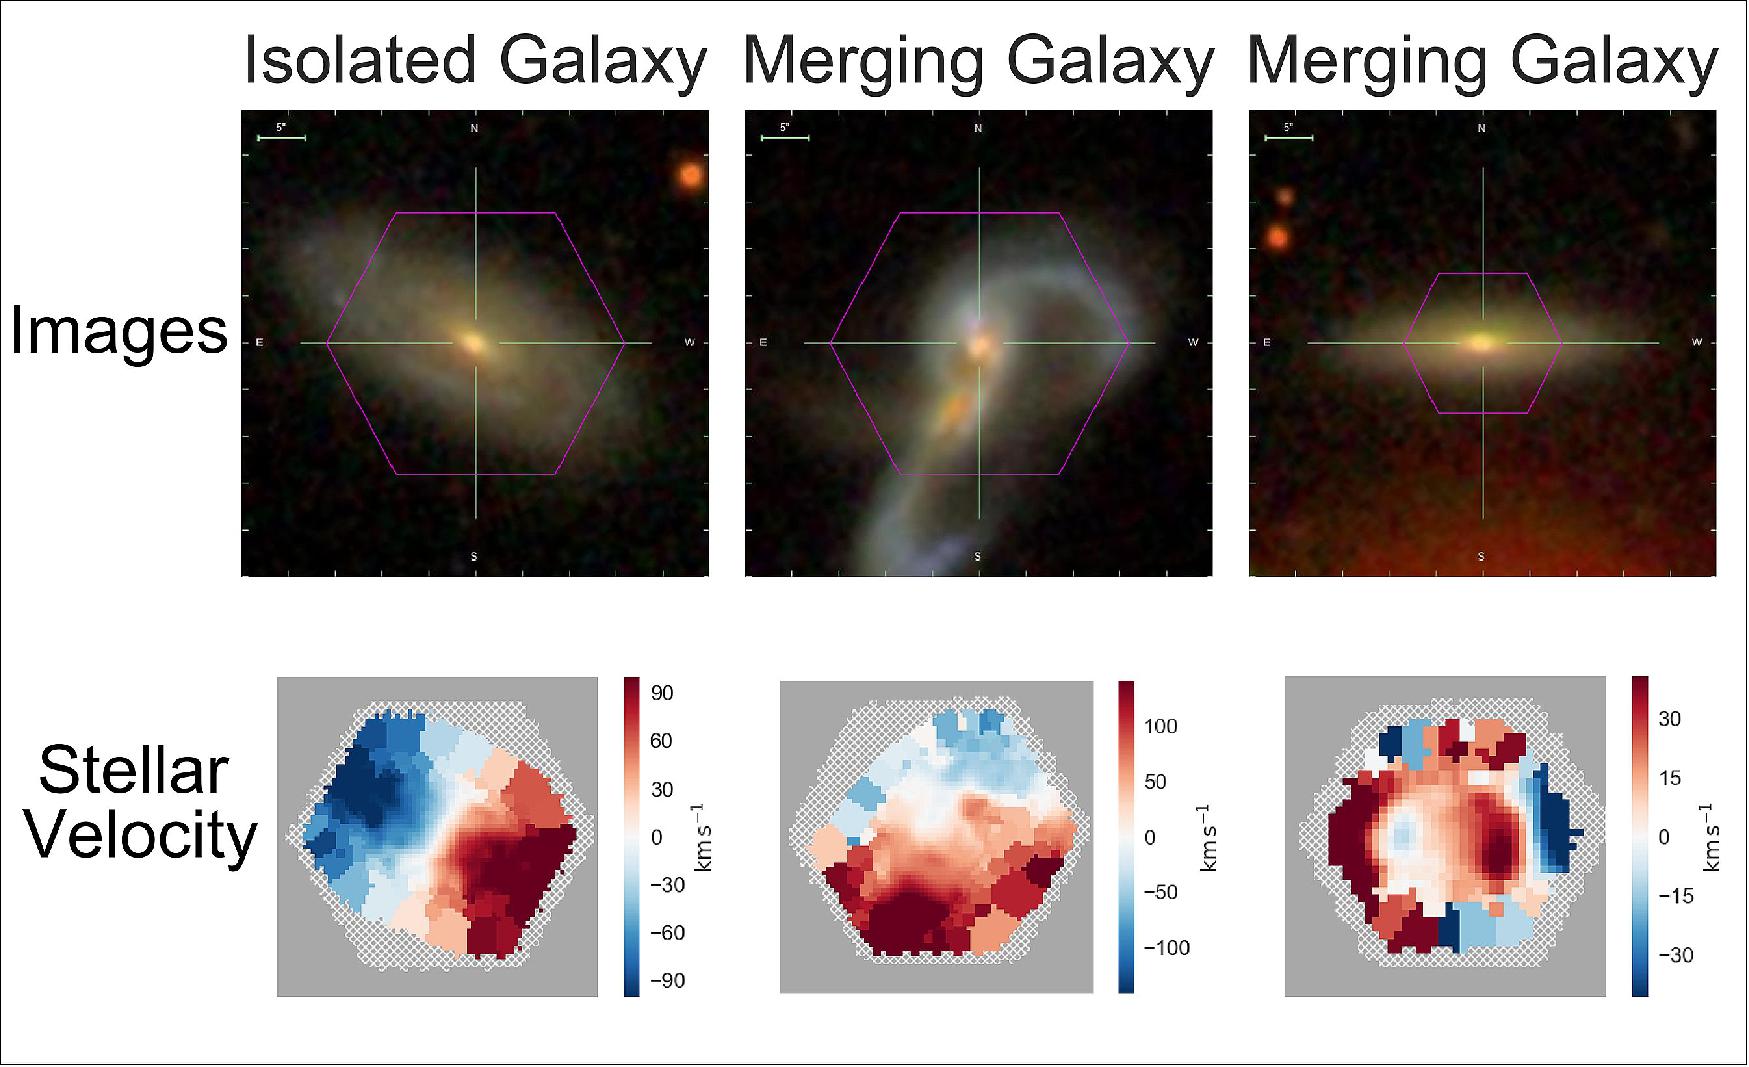 Figure 18: Three galaxies observed by the SDSS MaNGA survey. The top row shows the galaxies’ images, while the bottom row shows the velocity of the stars within the galaxies; red means the stars are moving away from us and blue means towards us. The panel on the left shows an isolated spiral galaxy, not undergoing a merger. The middle panels show a spectacular pair of merging galaxies, obvious in both the image and the velocity map. The right panels show what appears in the image to be a single galaxy – but the velocity map reveals that it is actually a galaxy that has just merged. This is evident in the disturbed (counter-rotating) features in the velocity map. This example demonstrates the power of the team’s new method, which will identify merging galaxies using both imaging and kinematics (image credit: Rebecca Nevin (University of Colorado Boulder) and the SDSS collaboration)